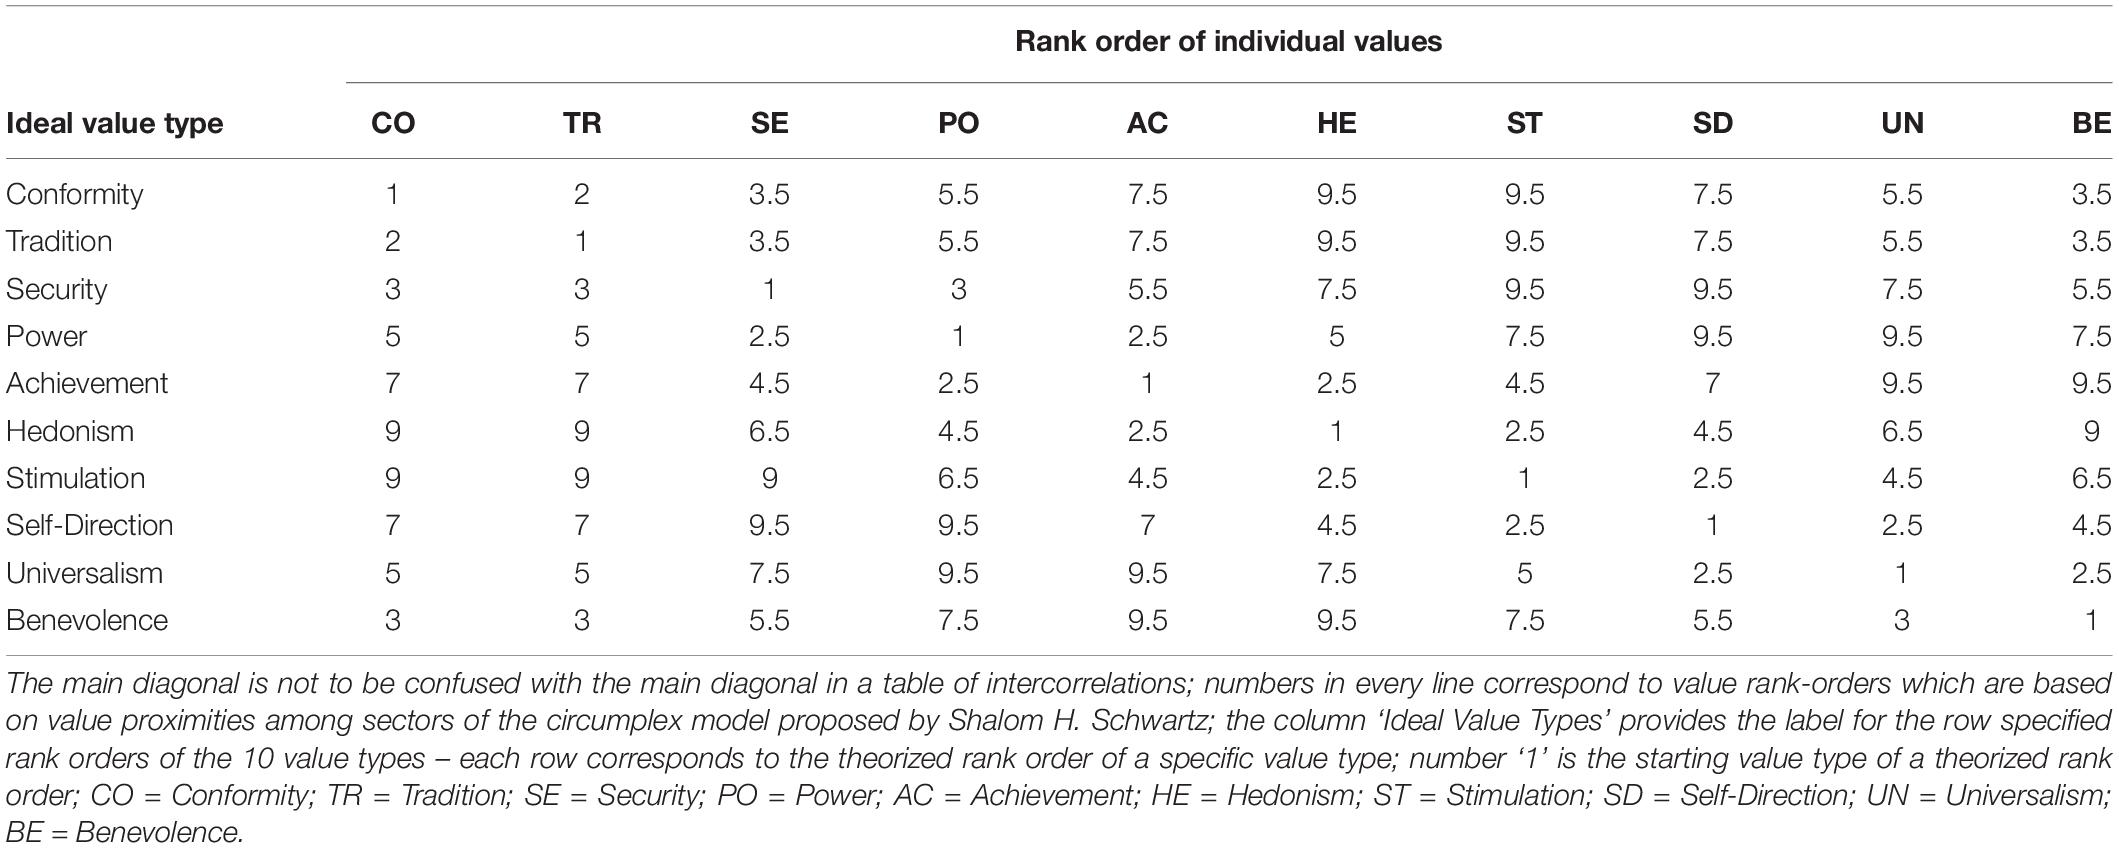 Table 1. Ideal value types based on the rank order of individual values